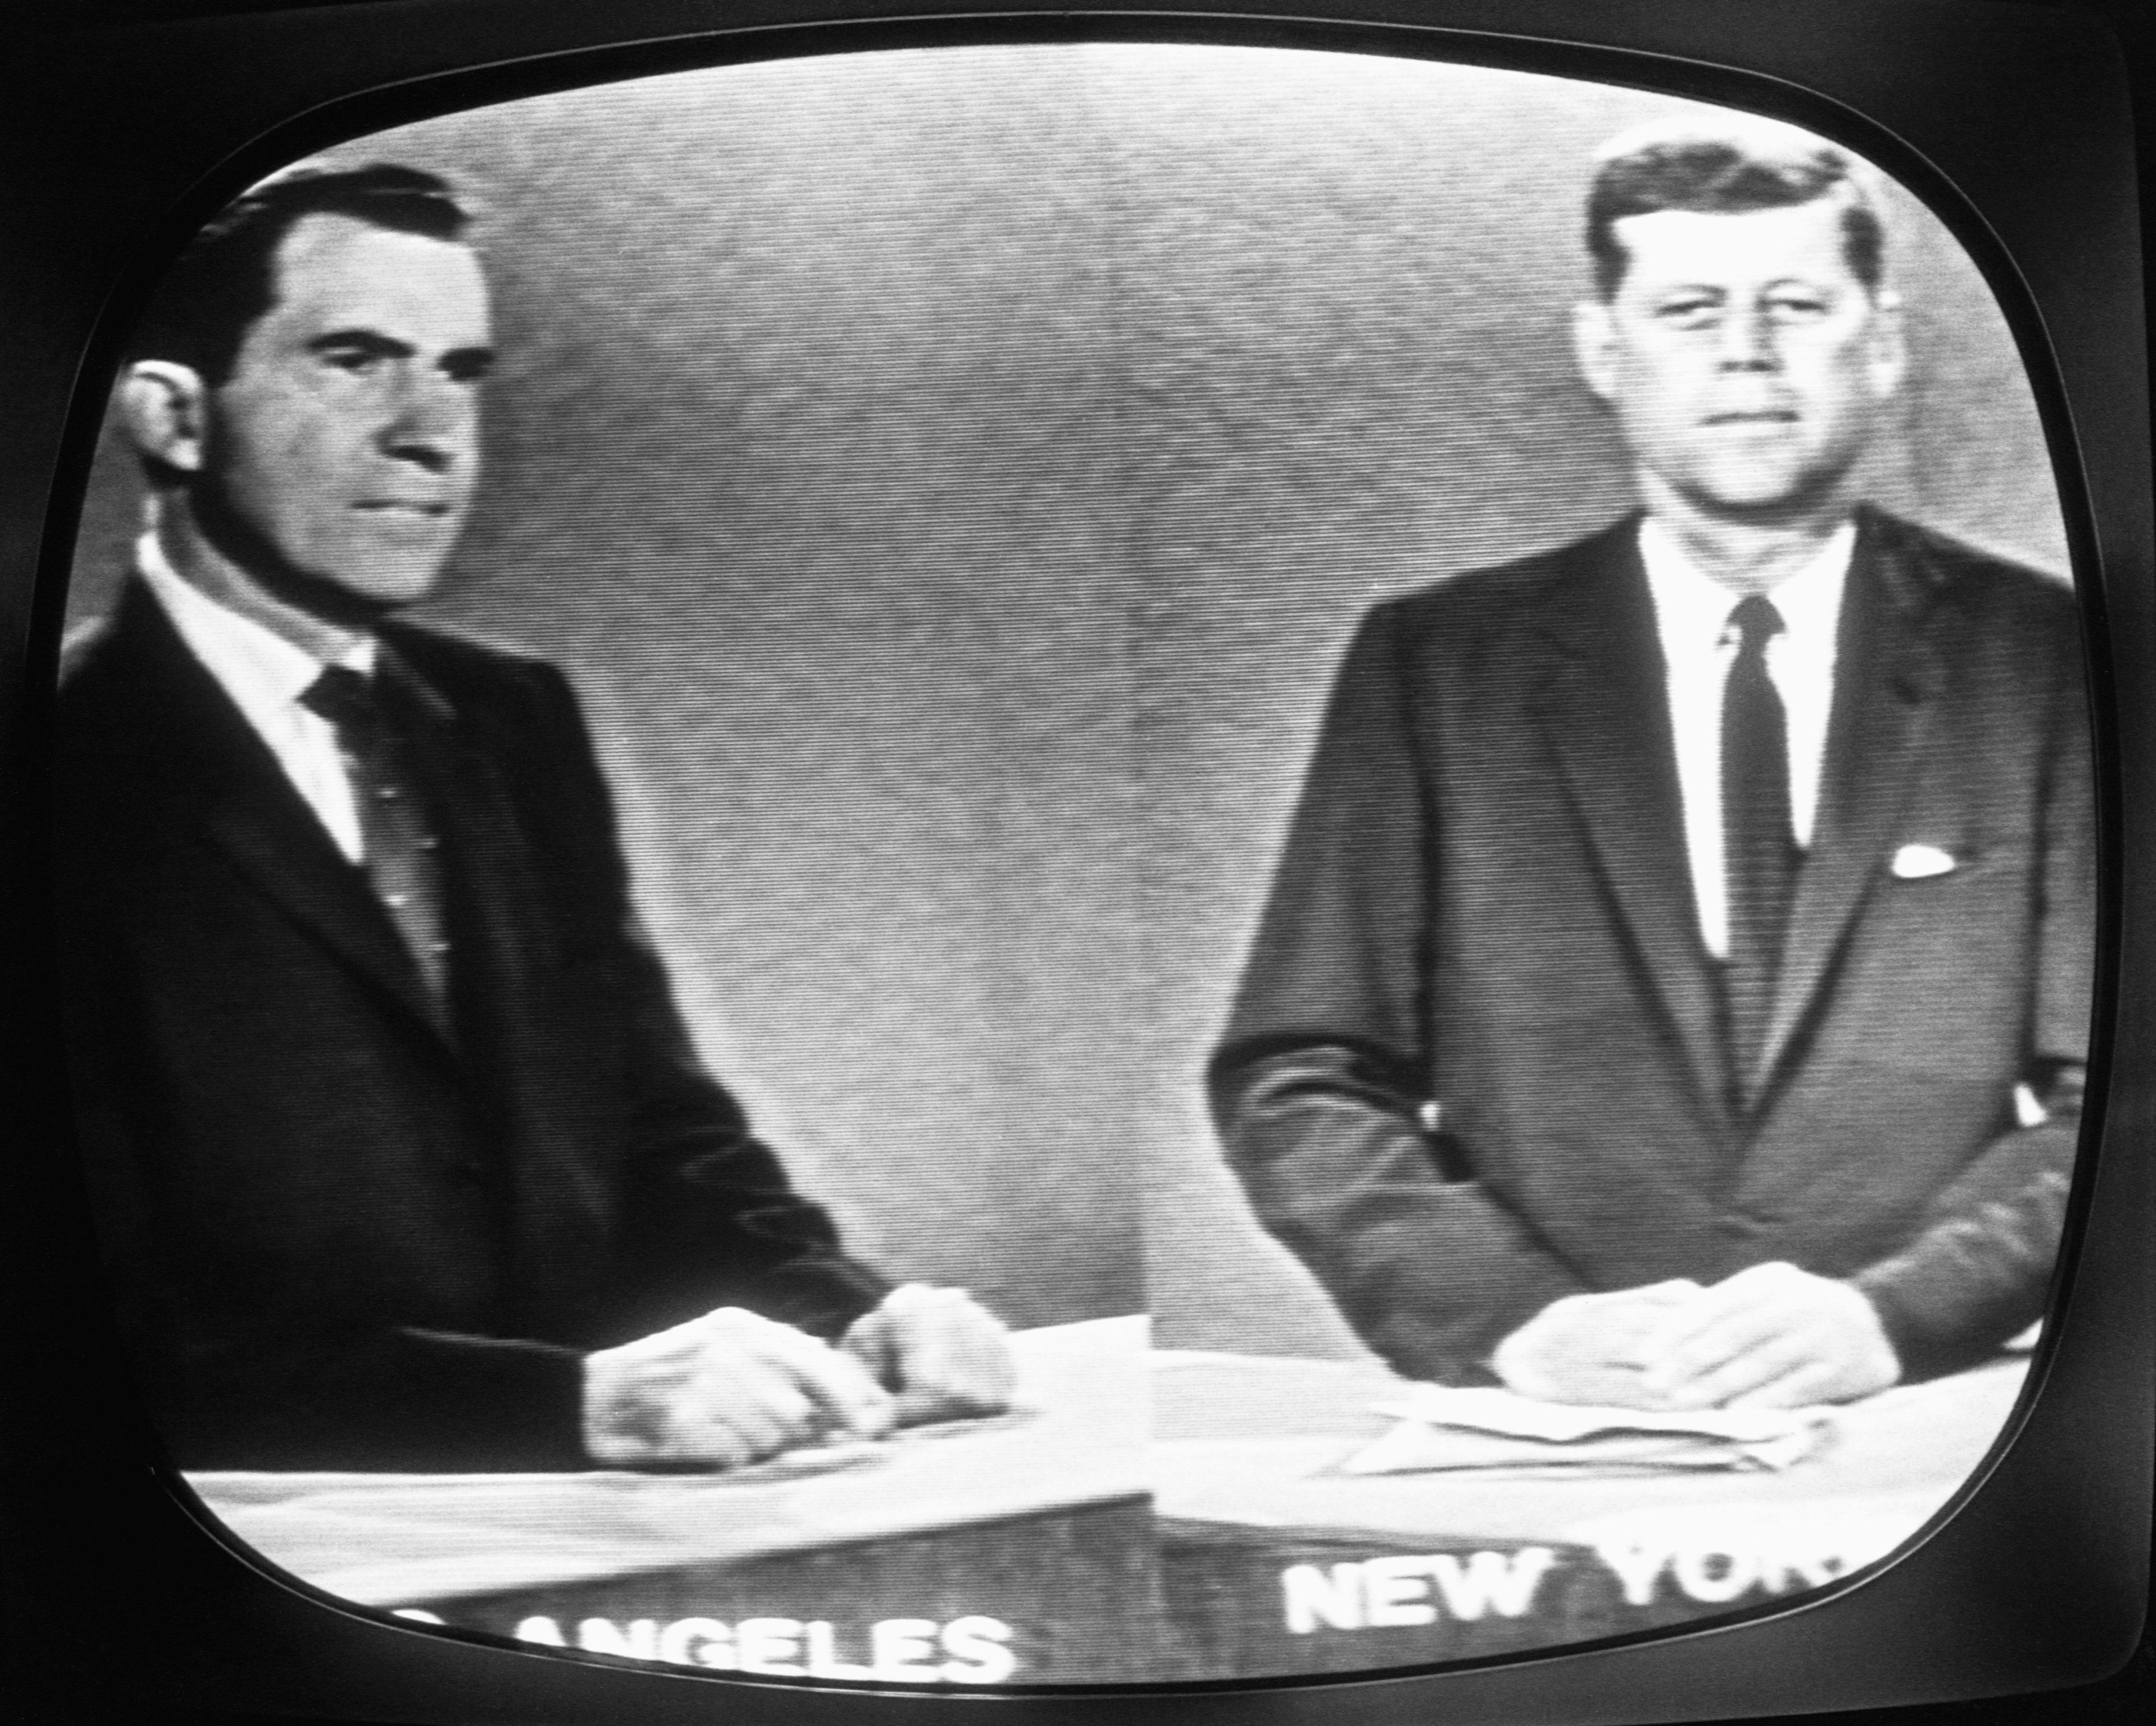 Kennedy, right, and Nixon, left, standing at podiums during a televised debate